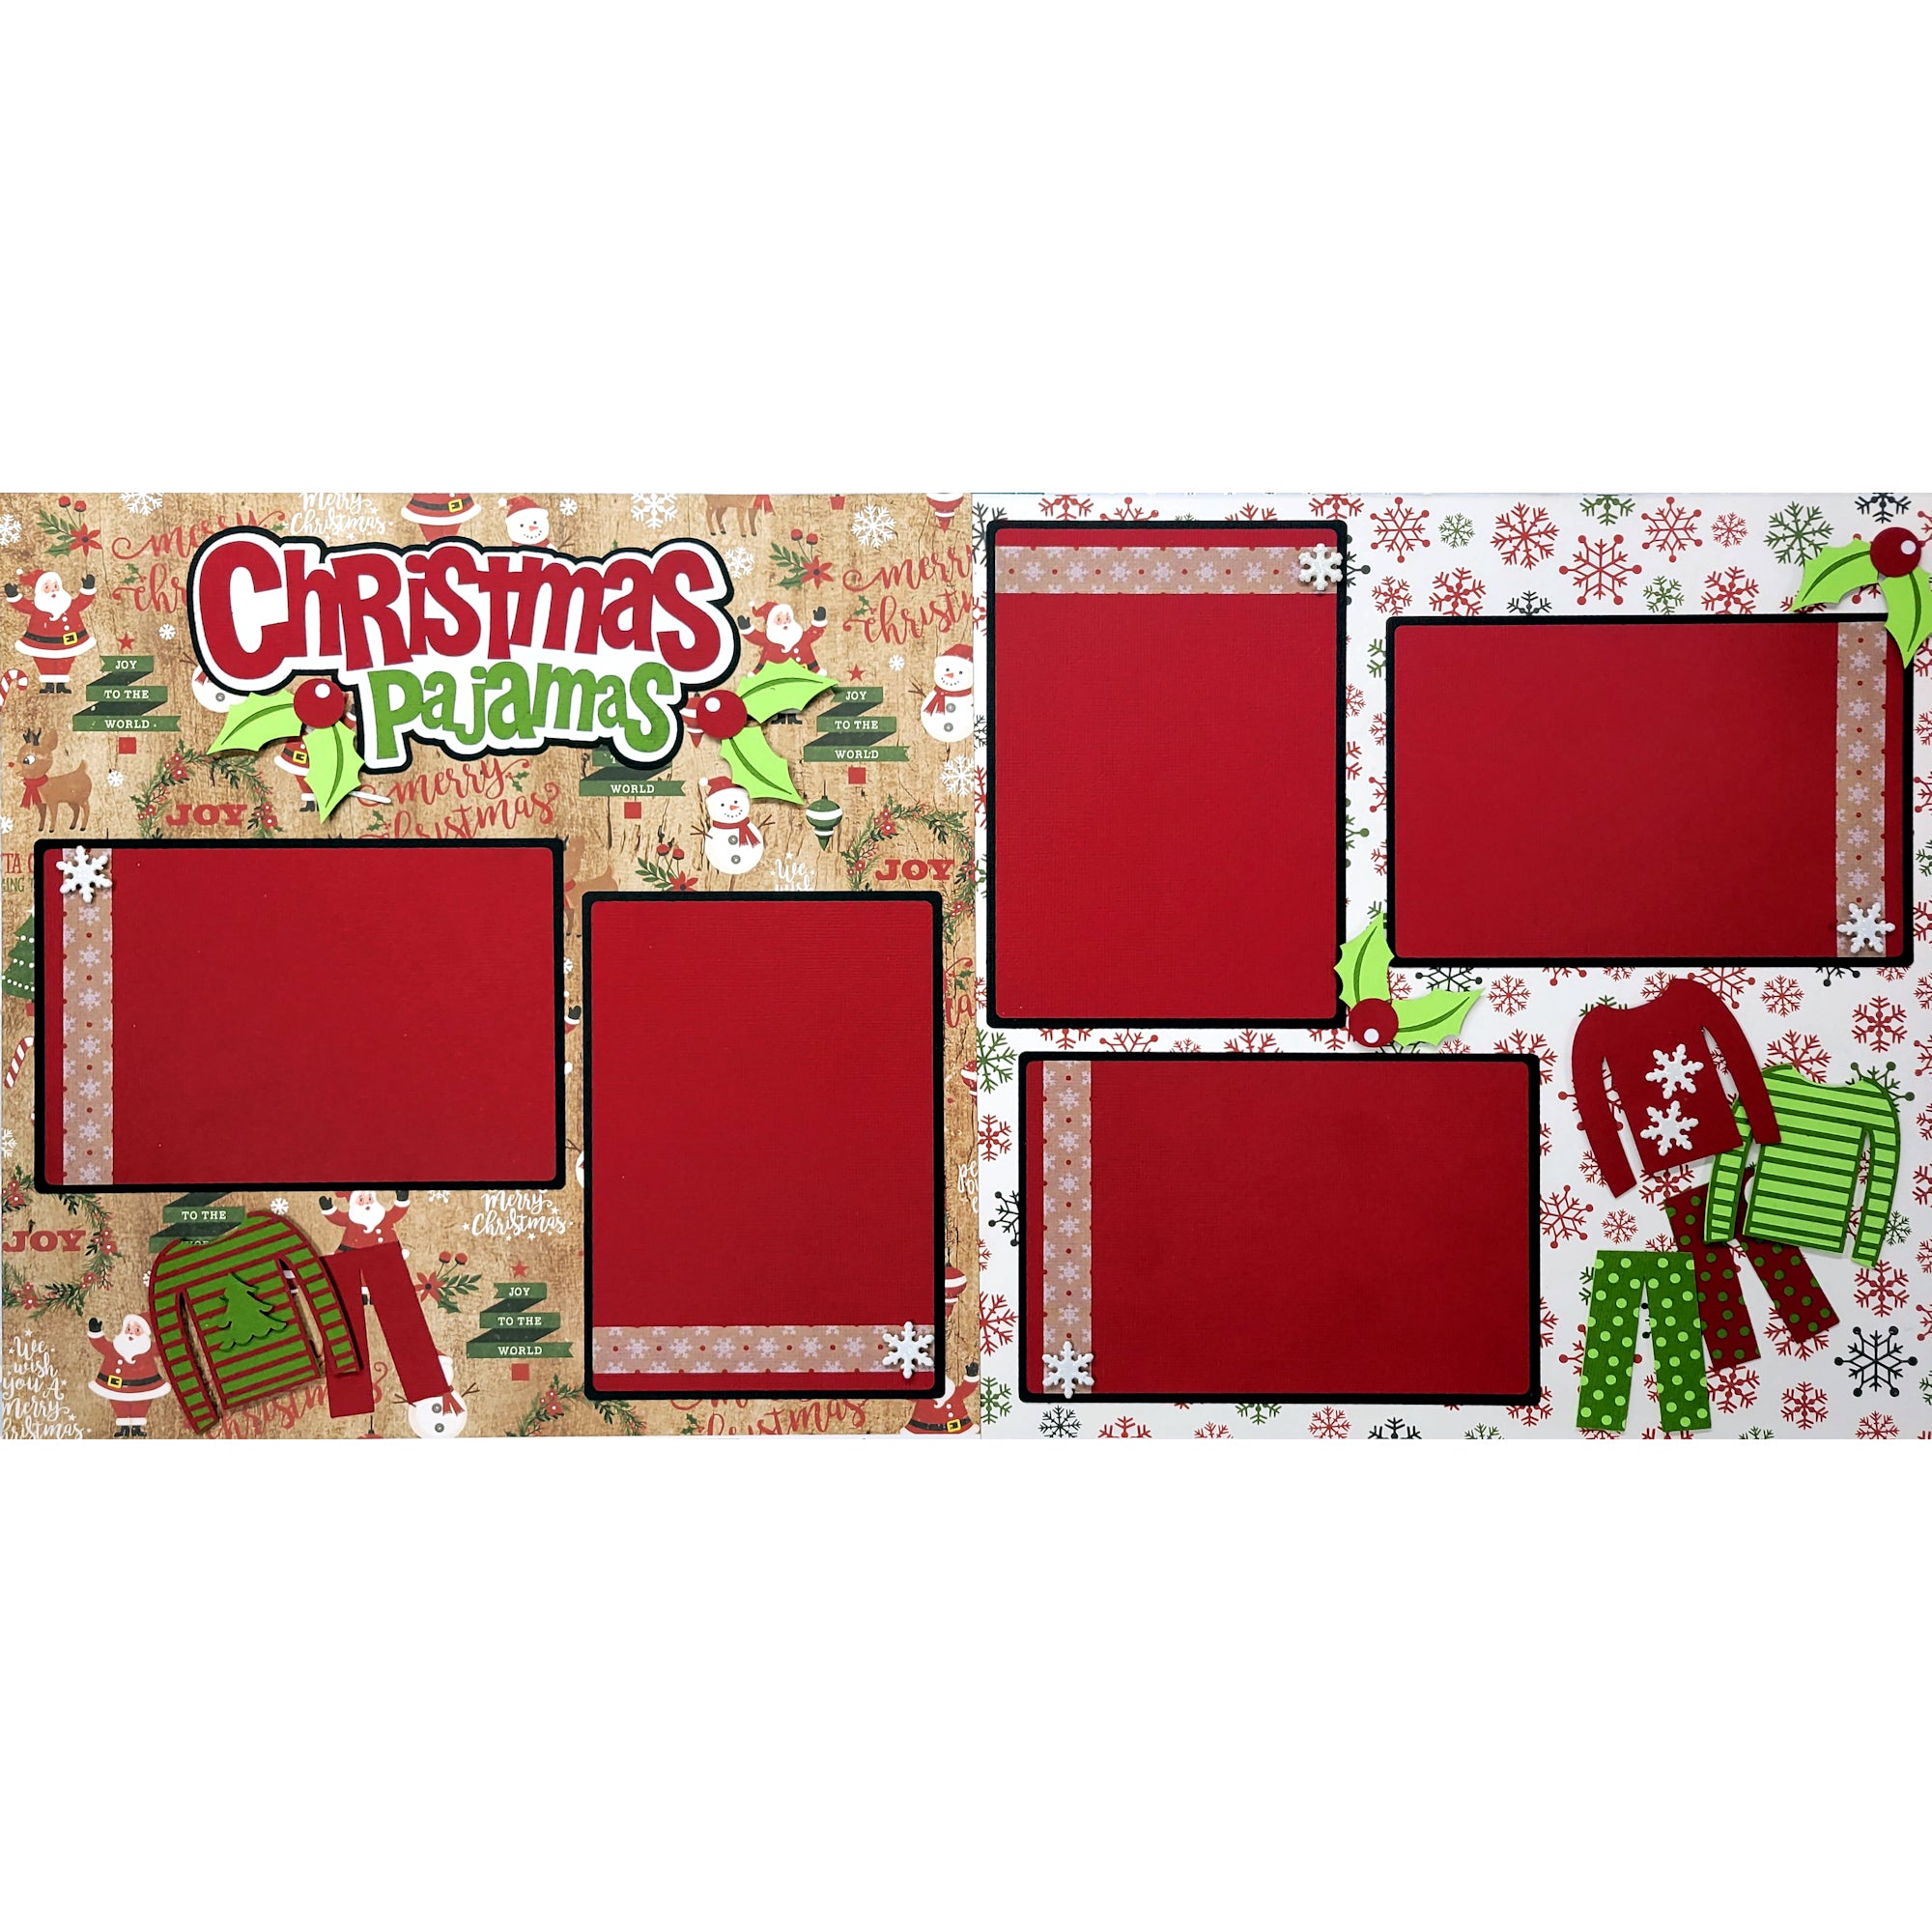 Christmas Pajamas (2) - 12 x 12 Pages, Fully-Assembled & Hand-Crafted 3D Scrapbook Premade by SSC Designs